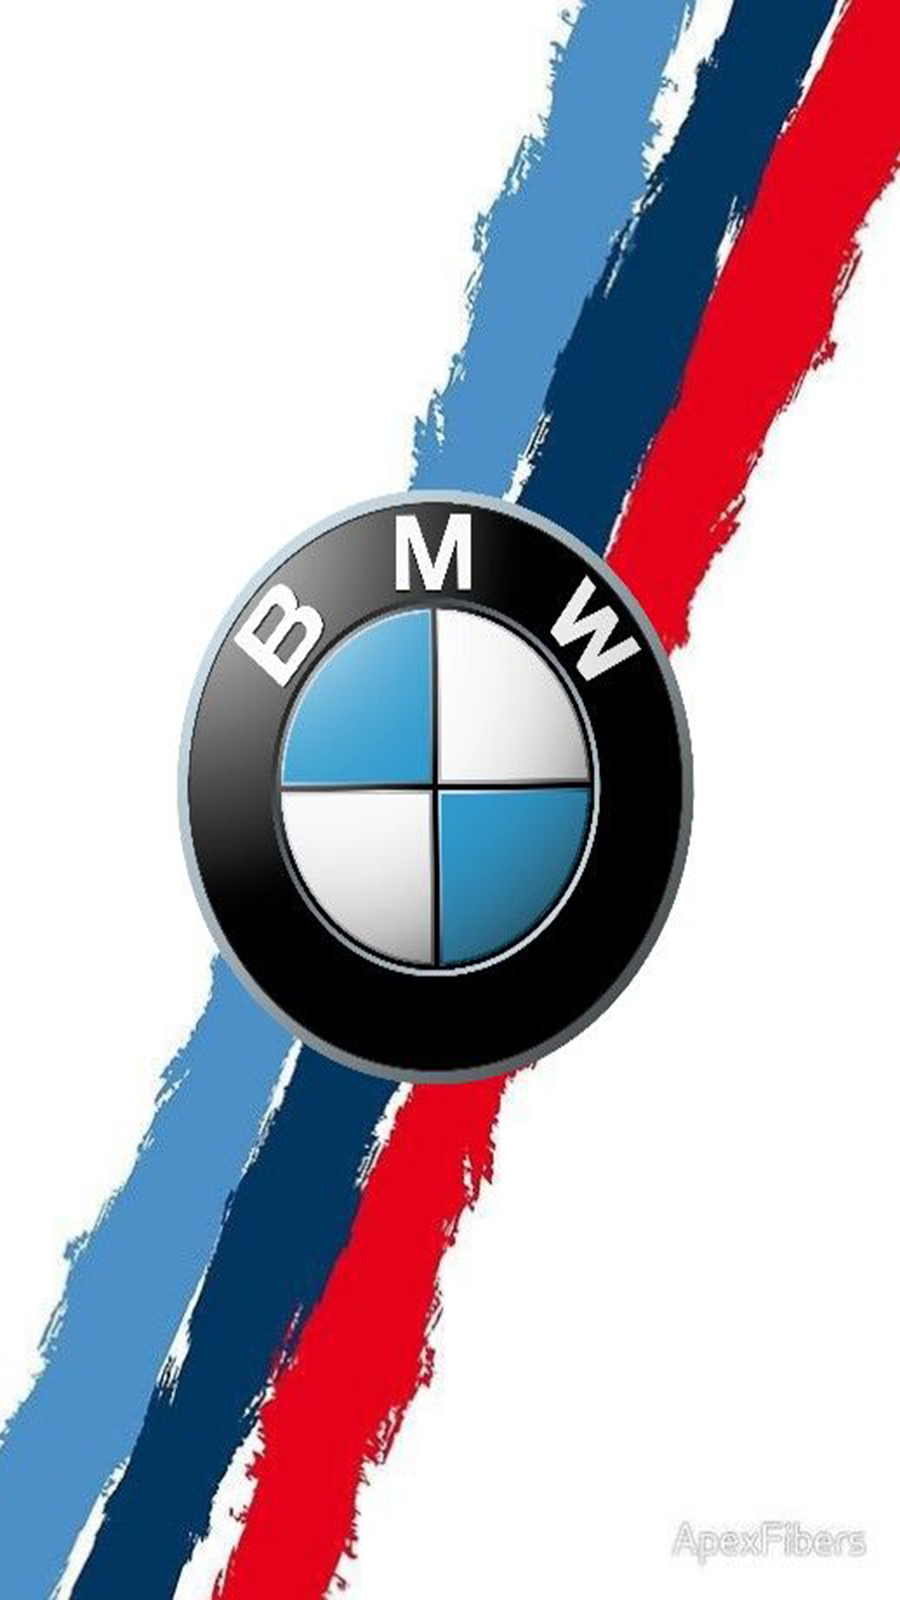 Bmw Logo Iphone Wallpapers